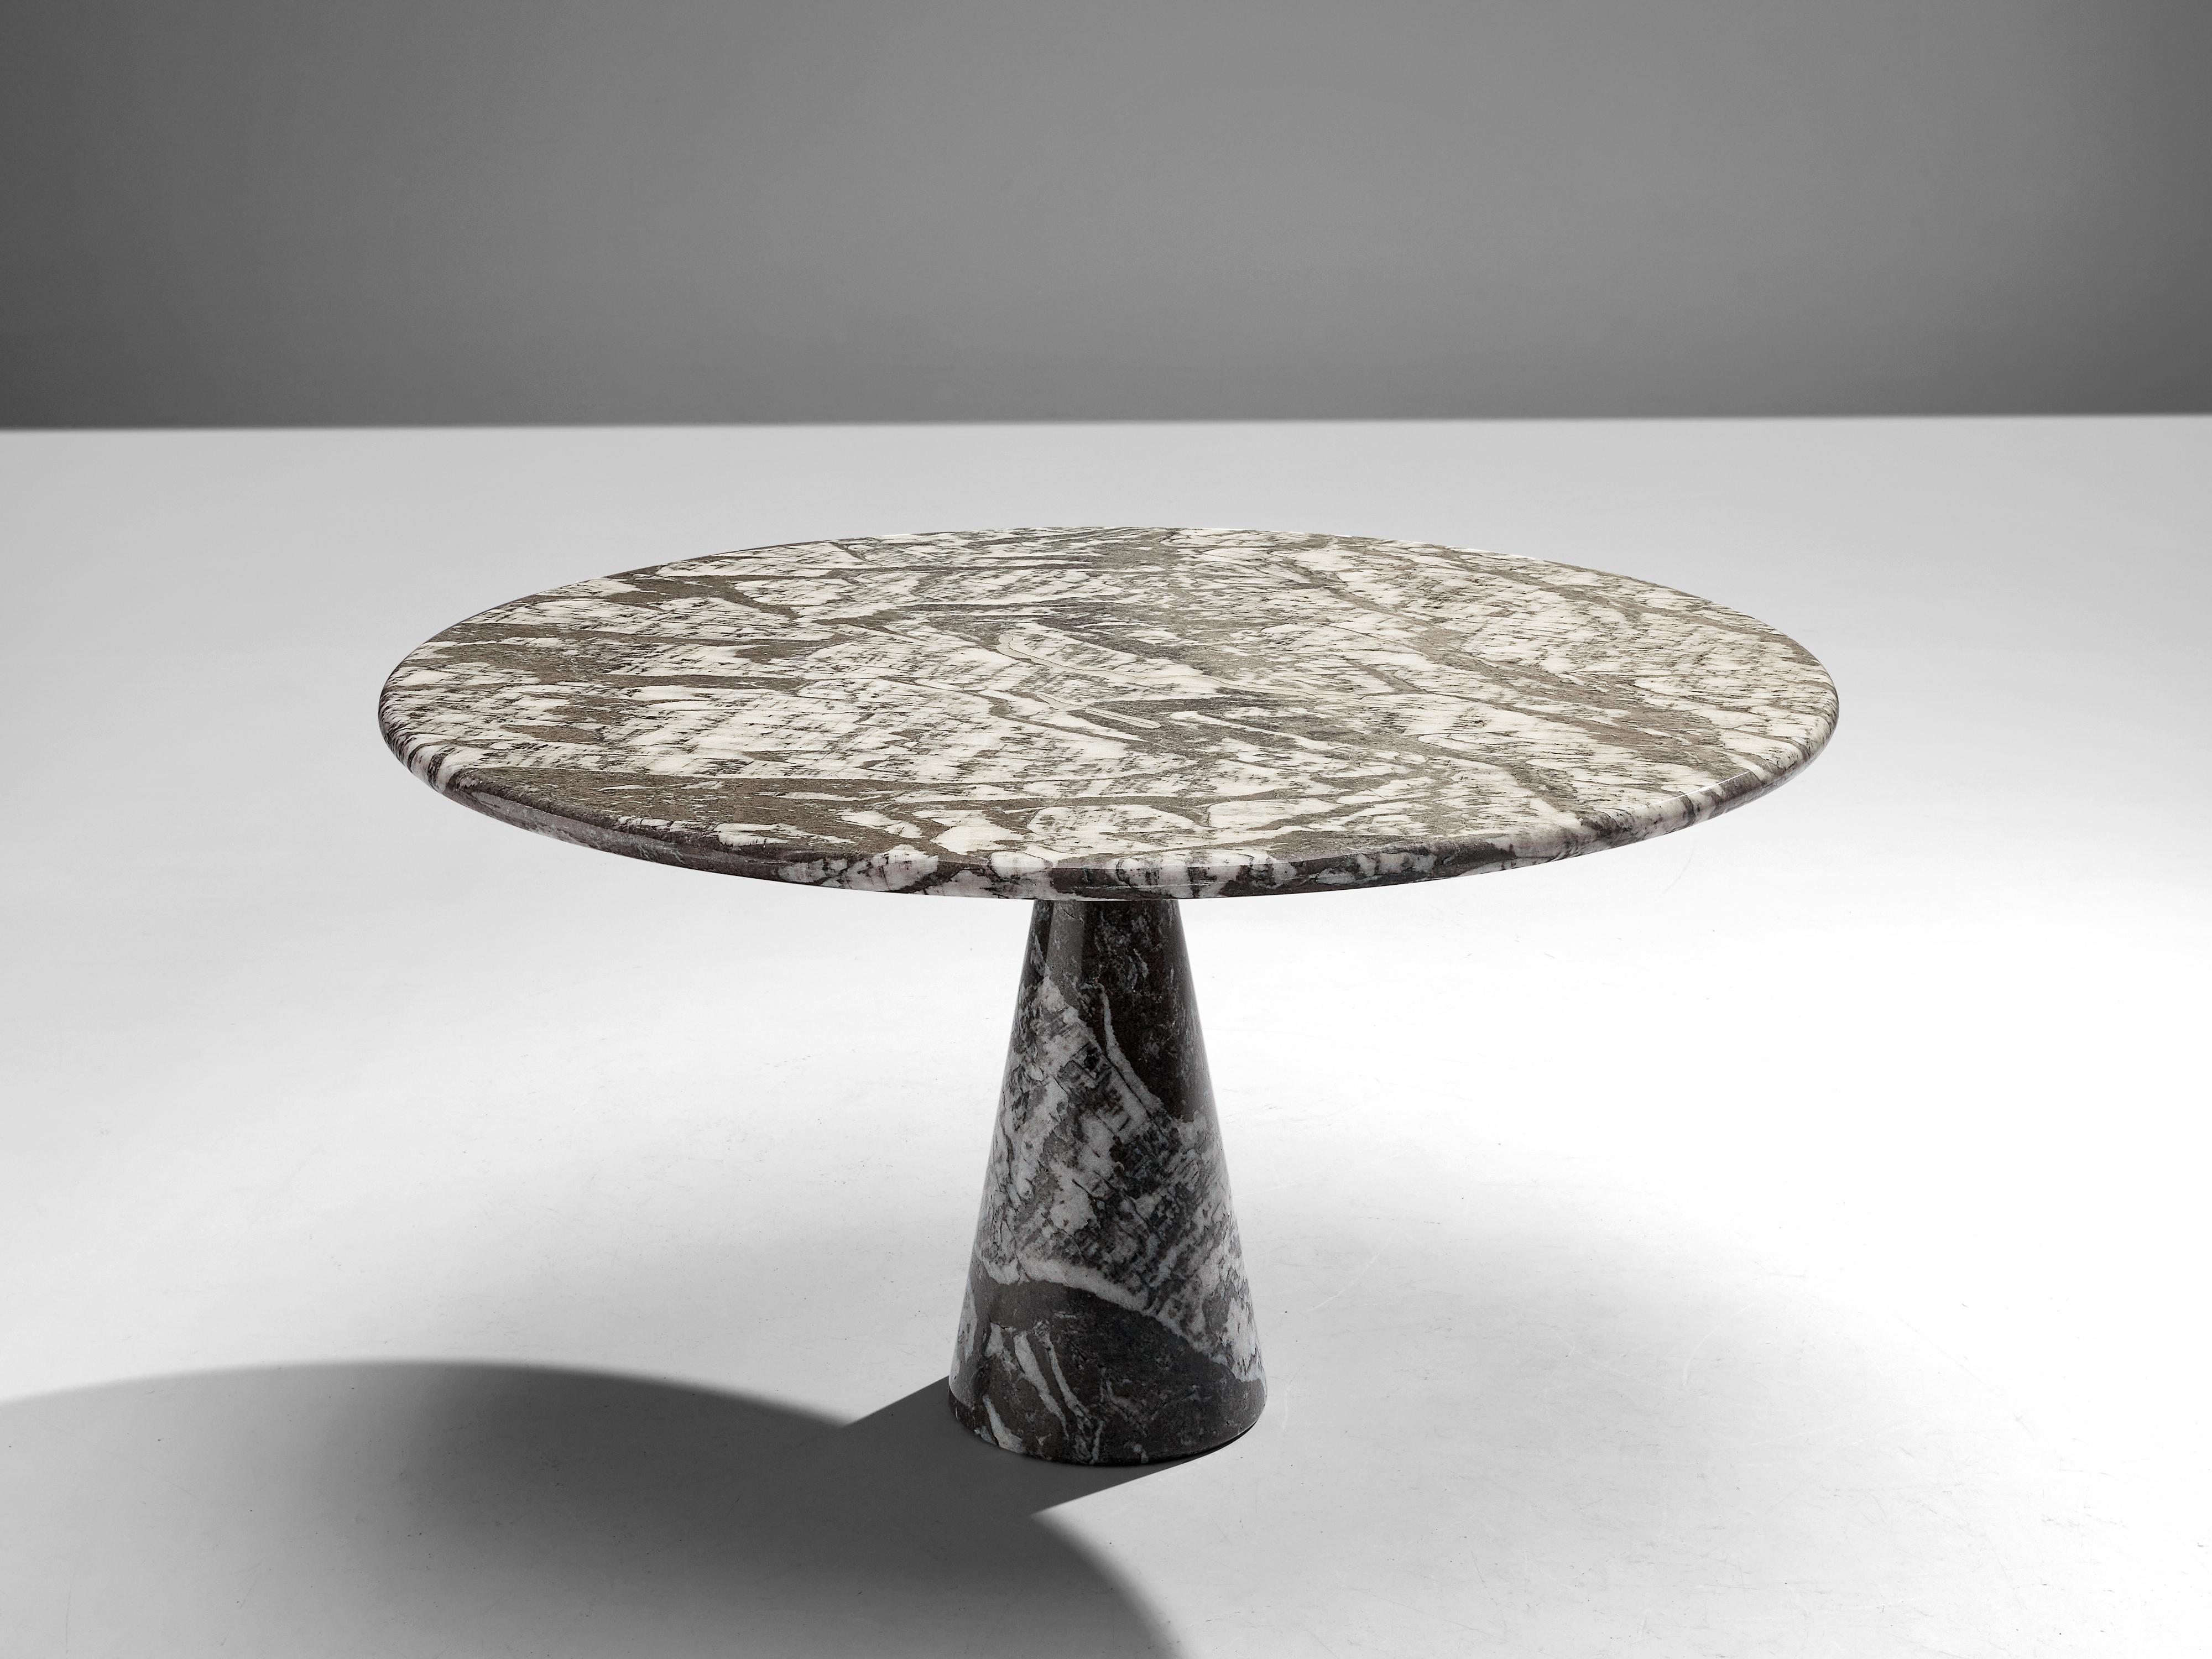 Angelo Mangiarotti for Skipper, table 'M1', marble, Italy, 1969.

This strikingly patterned brown to grey table has a cone shaped base and a circular top with a strongly contrasting veins in white. The circular top rests perfectly on the cone. The